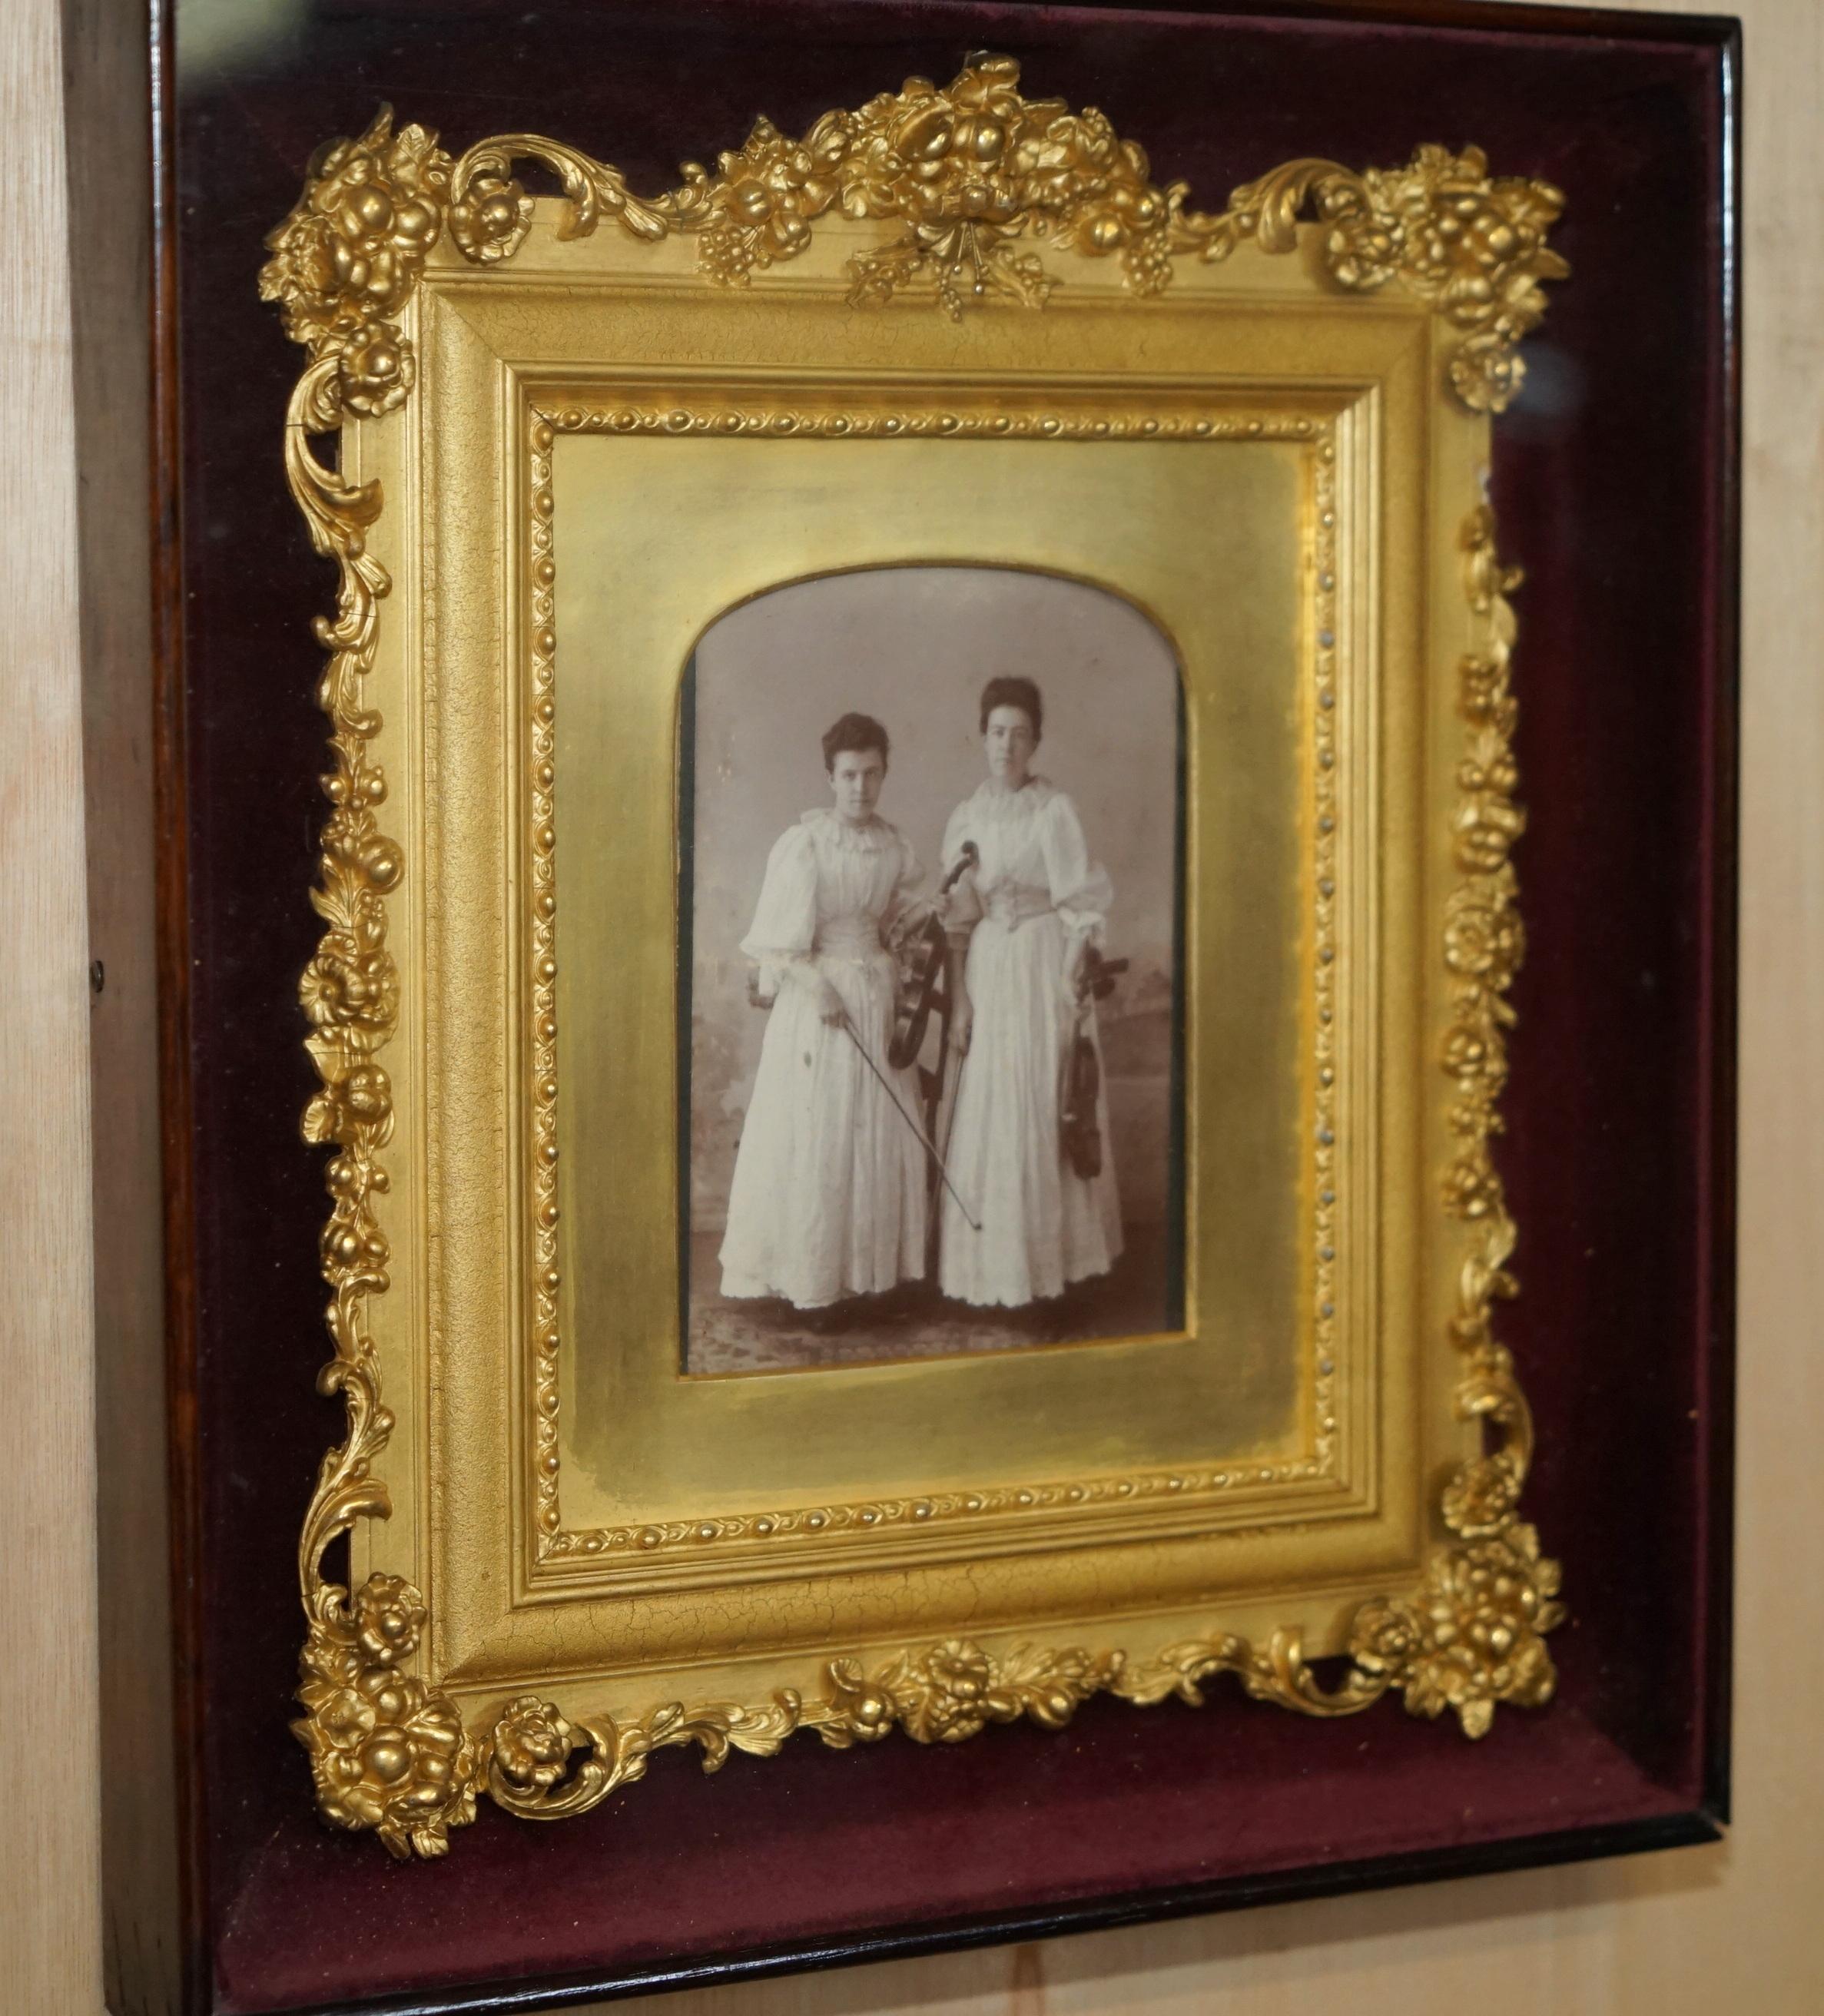 Royal House Antiques

Royal House Antiques is delighted to offer for sale this lovely, one of a kind Victorian photo of two young violinist girls in a period gilt frame which has been cased and protected in a secondary case with the original maker